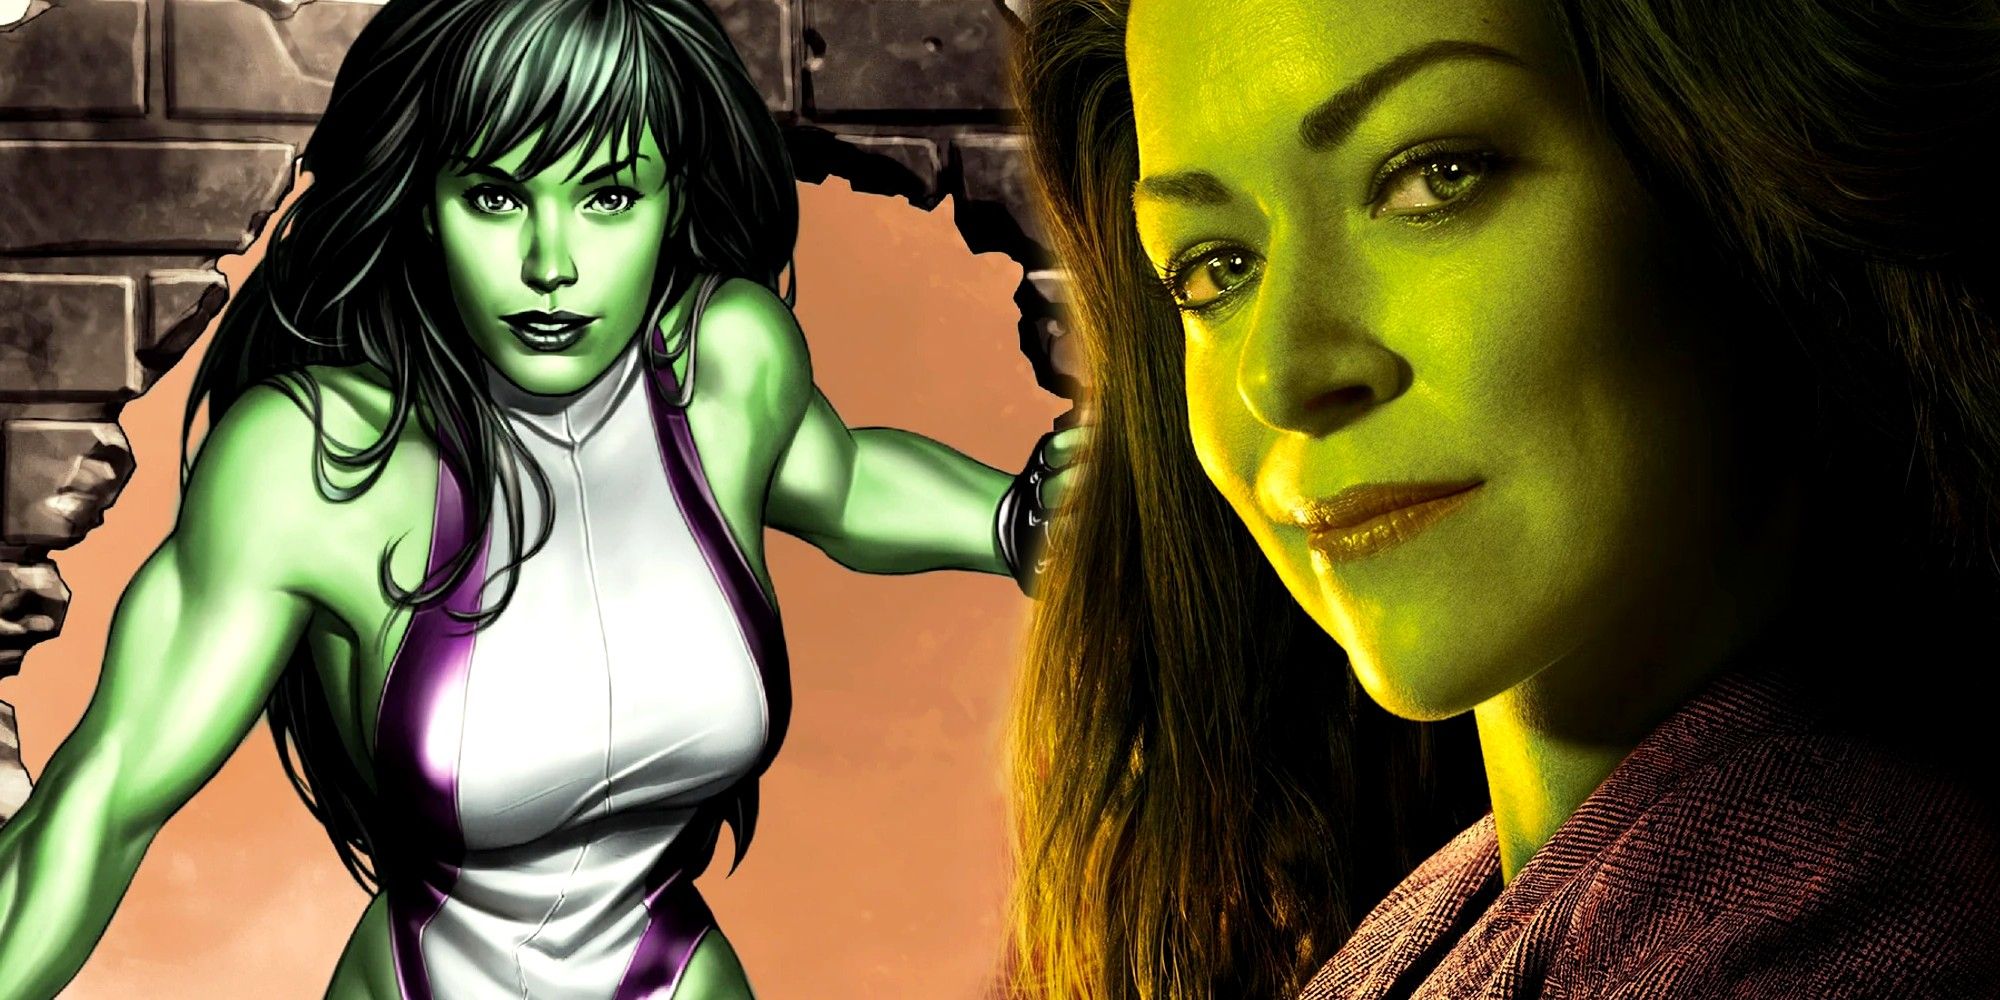 Best actress for a she hulk movie - Gen. Discussion - Comic Vine